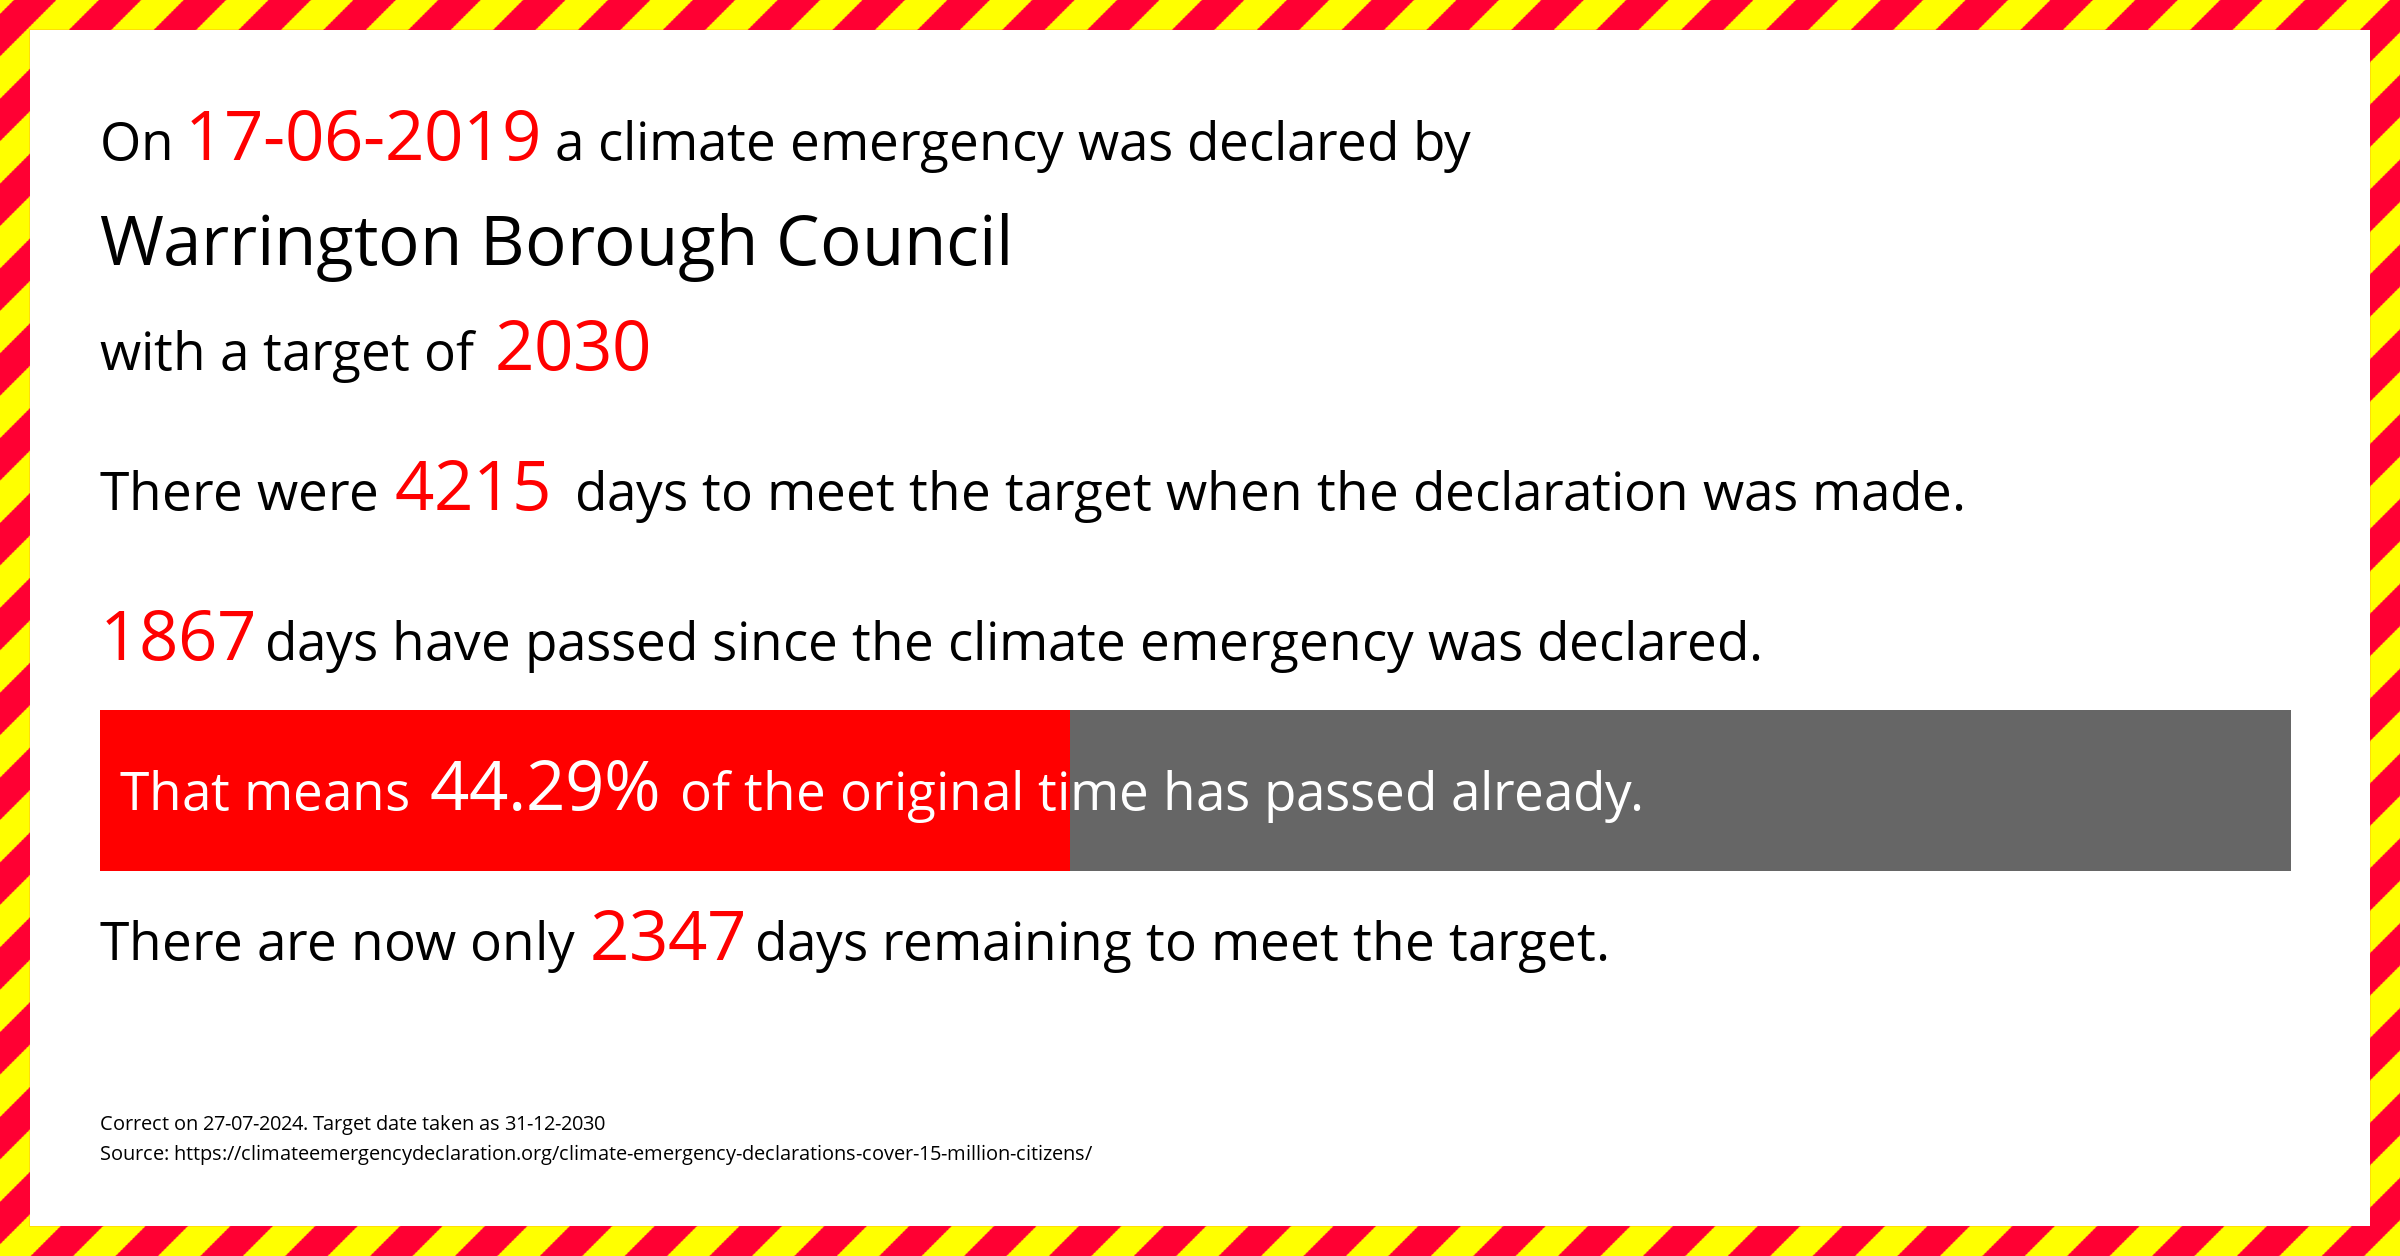 Warrington Borough Council declared a Climate emergency on Monday 17th June 2019, with a target of 2030.